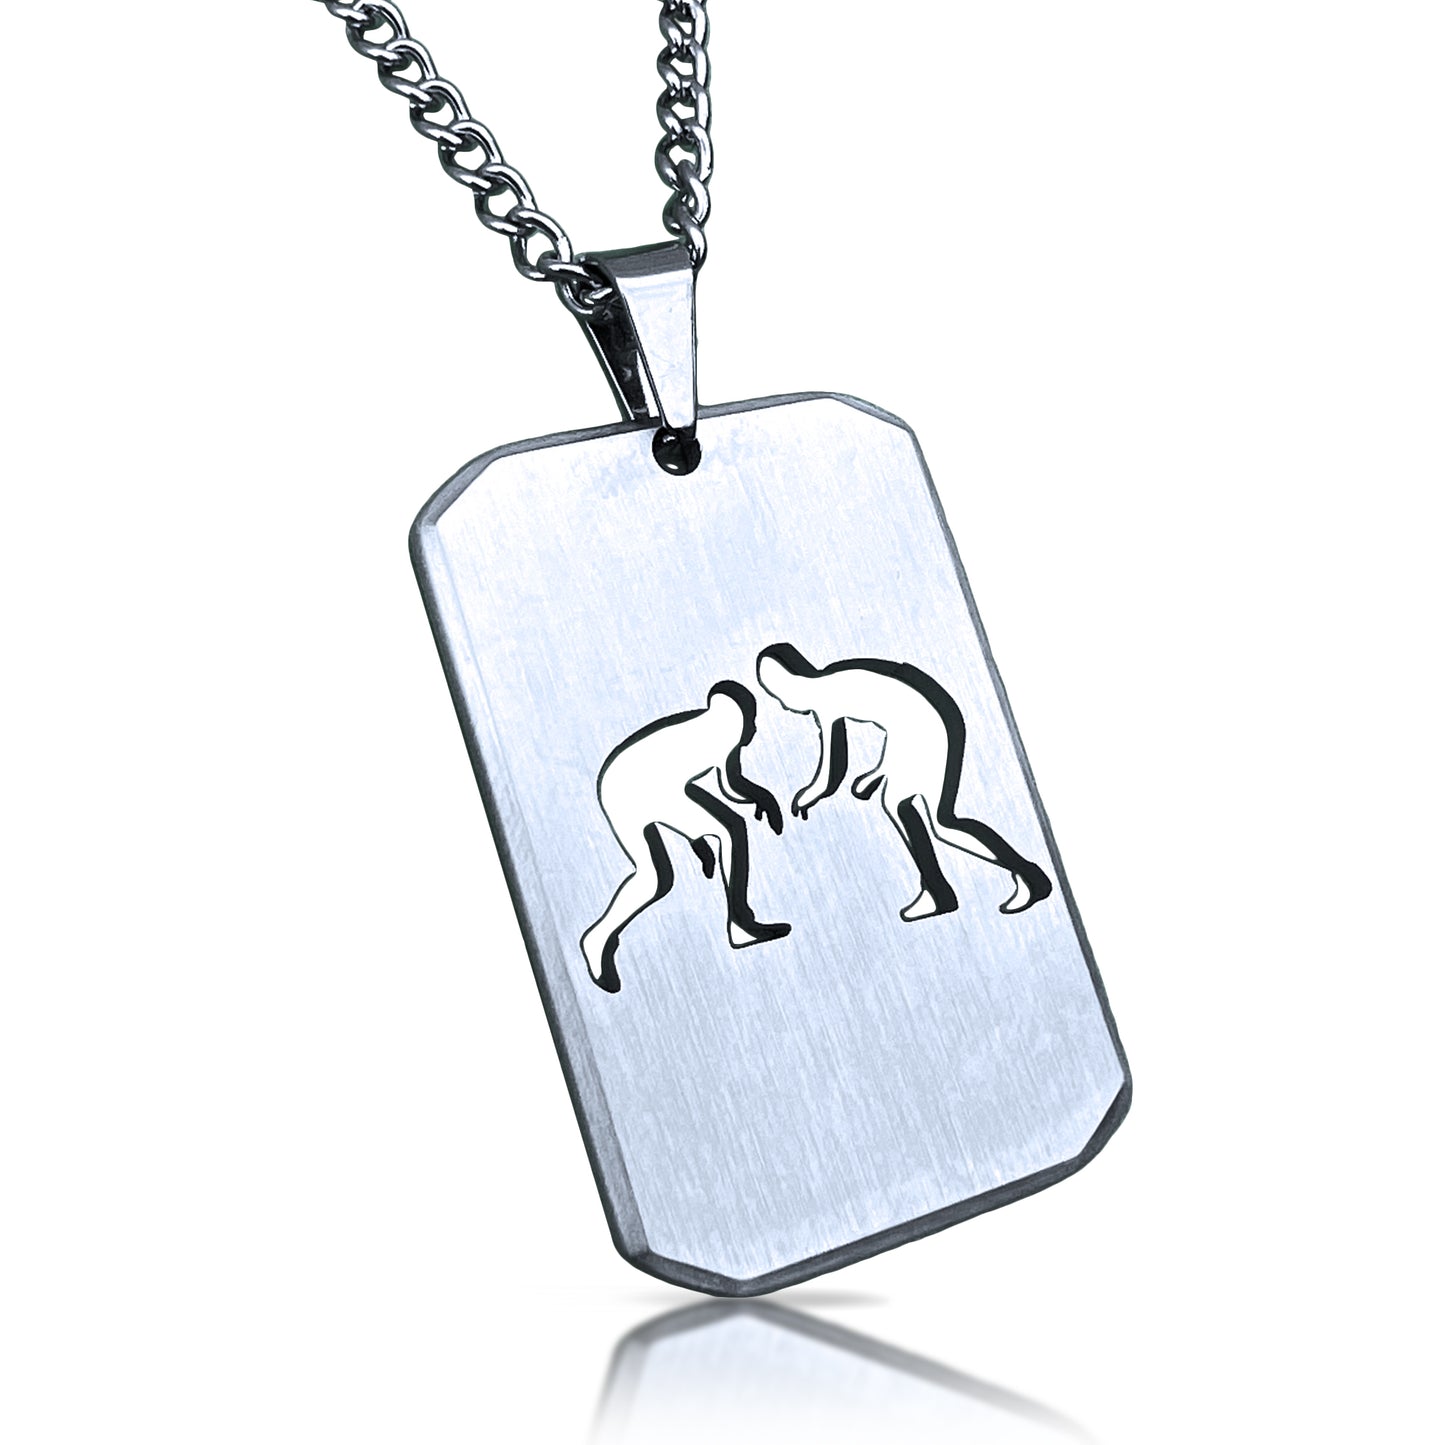 Wrestling Cut Out Pendant With Chain Necklace - Stainless Steel